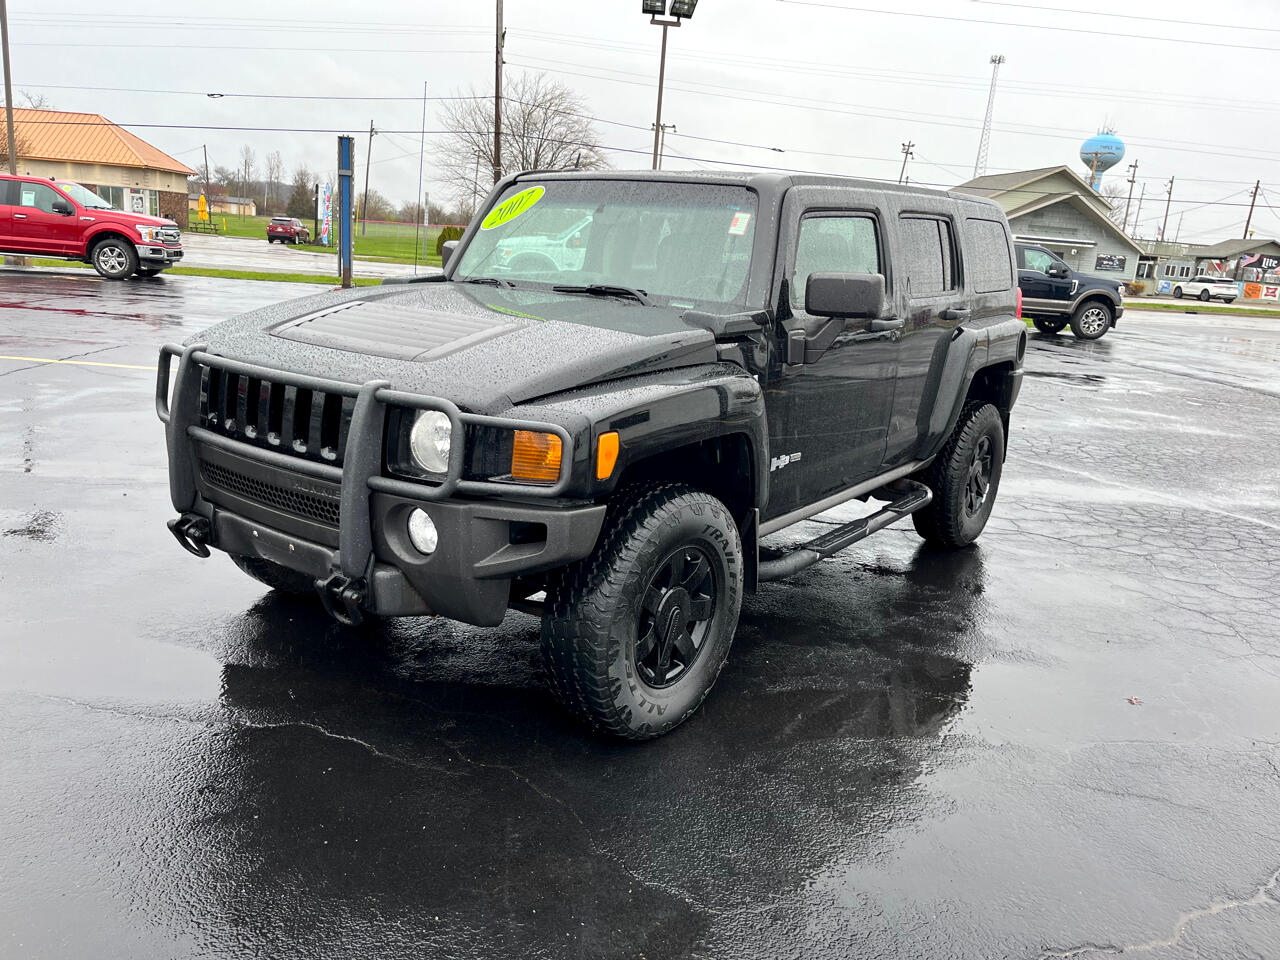 Used 2007 Hummer H3 H3 with VIN 5GTDN13E778244023 for sale in Three Oaks, MI